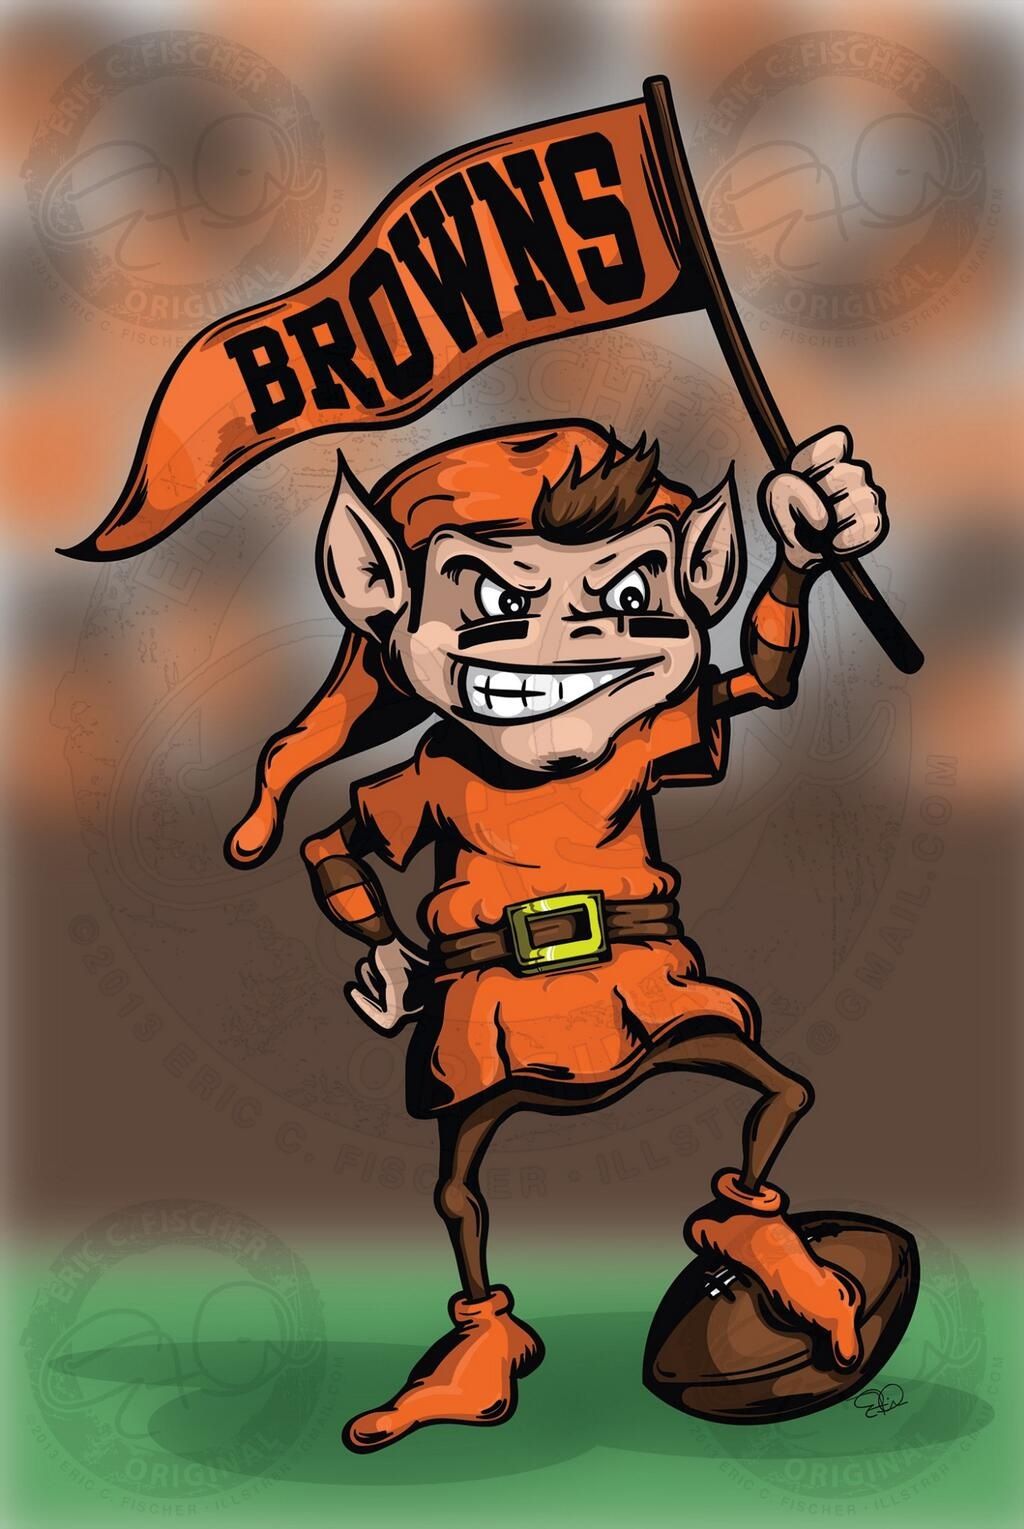 Brownie Elf. Cleveland browns history, Cleveland browns logo, Cleveland browns wallpaper